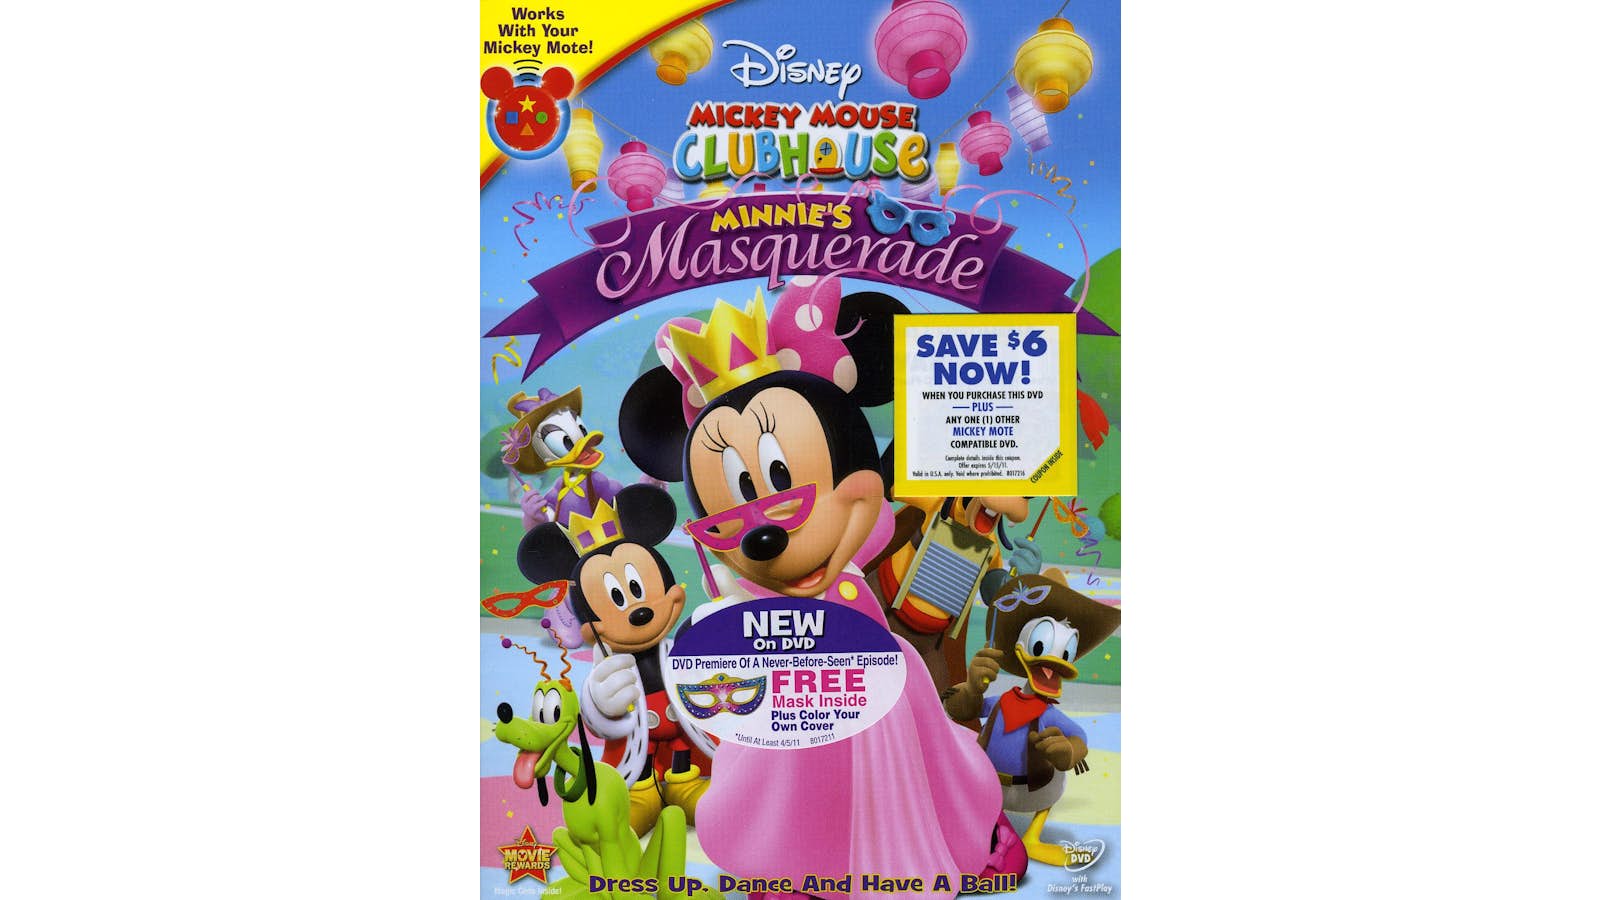 mickey mouse clubhouse dvd lot